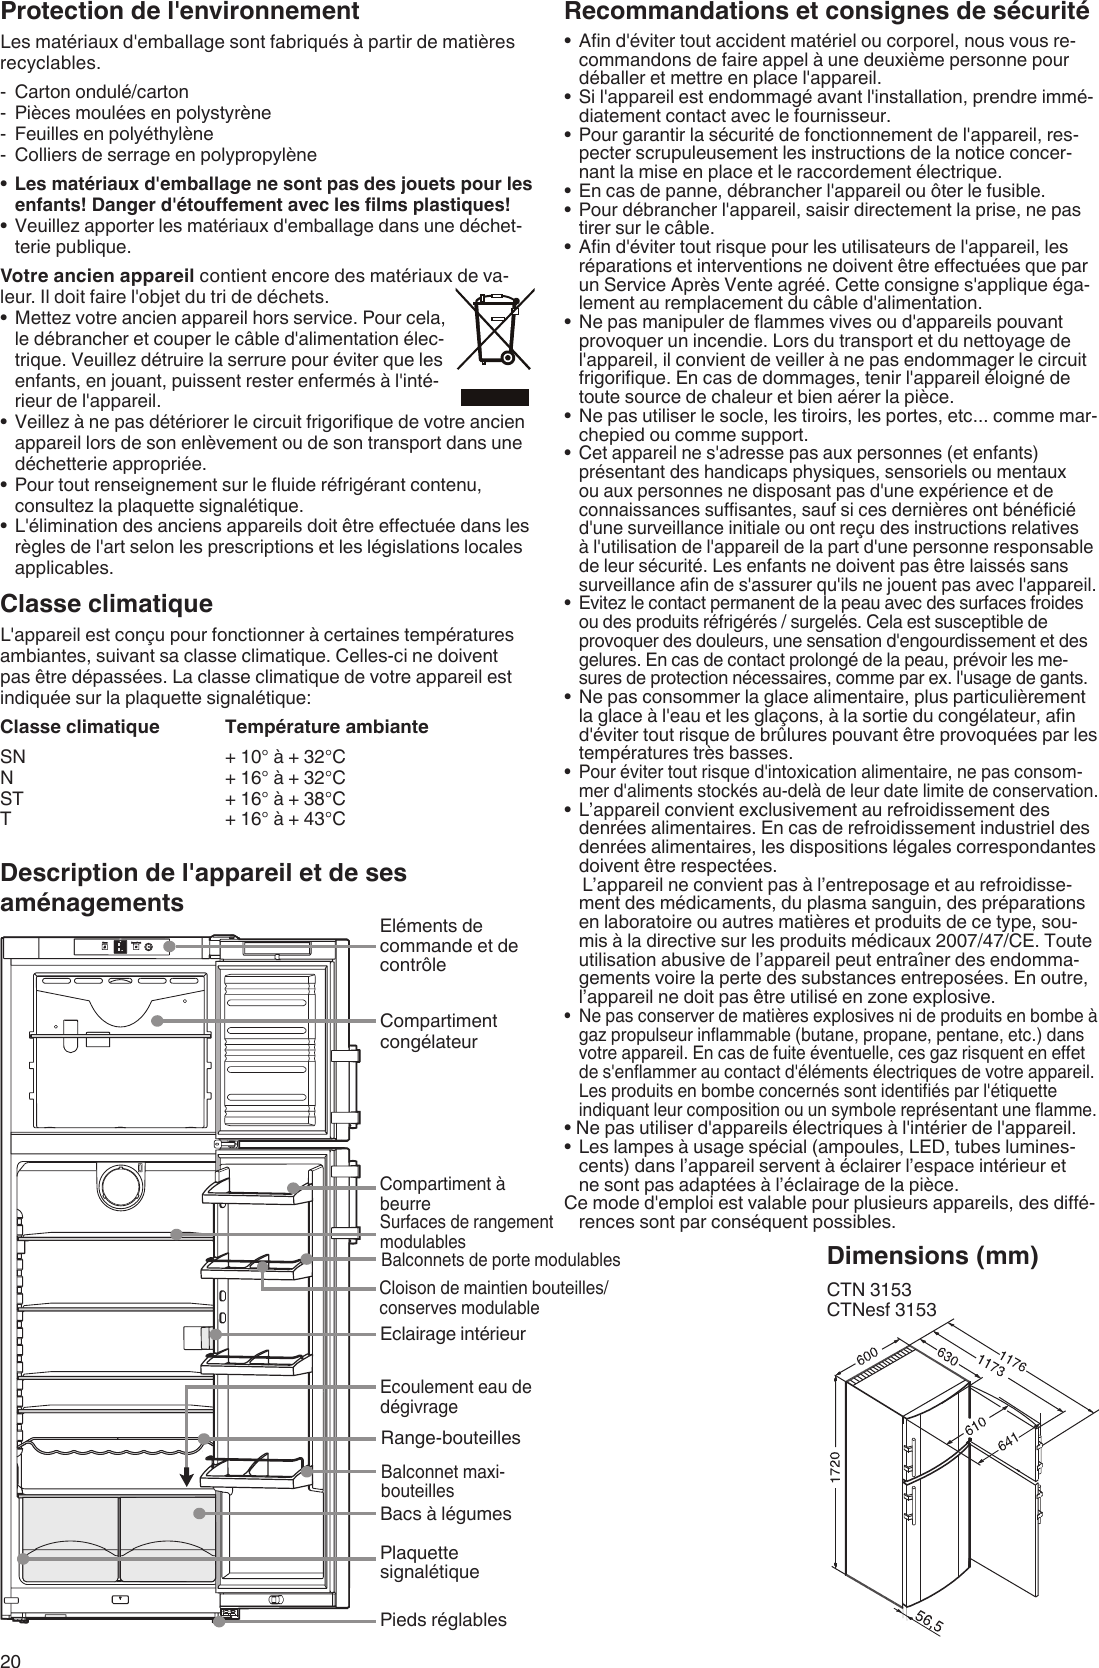 Page 2 of 7 - Liebherr Liebherr-Combined-Refrigerator-Freezer-Nofrost-7081-885-01-Users-Manual-  Liebherr-combined-refrigerator-freezer-nofrost-7081-885-01-users-manual